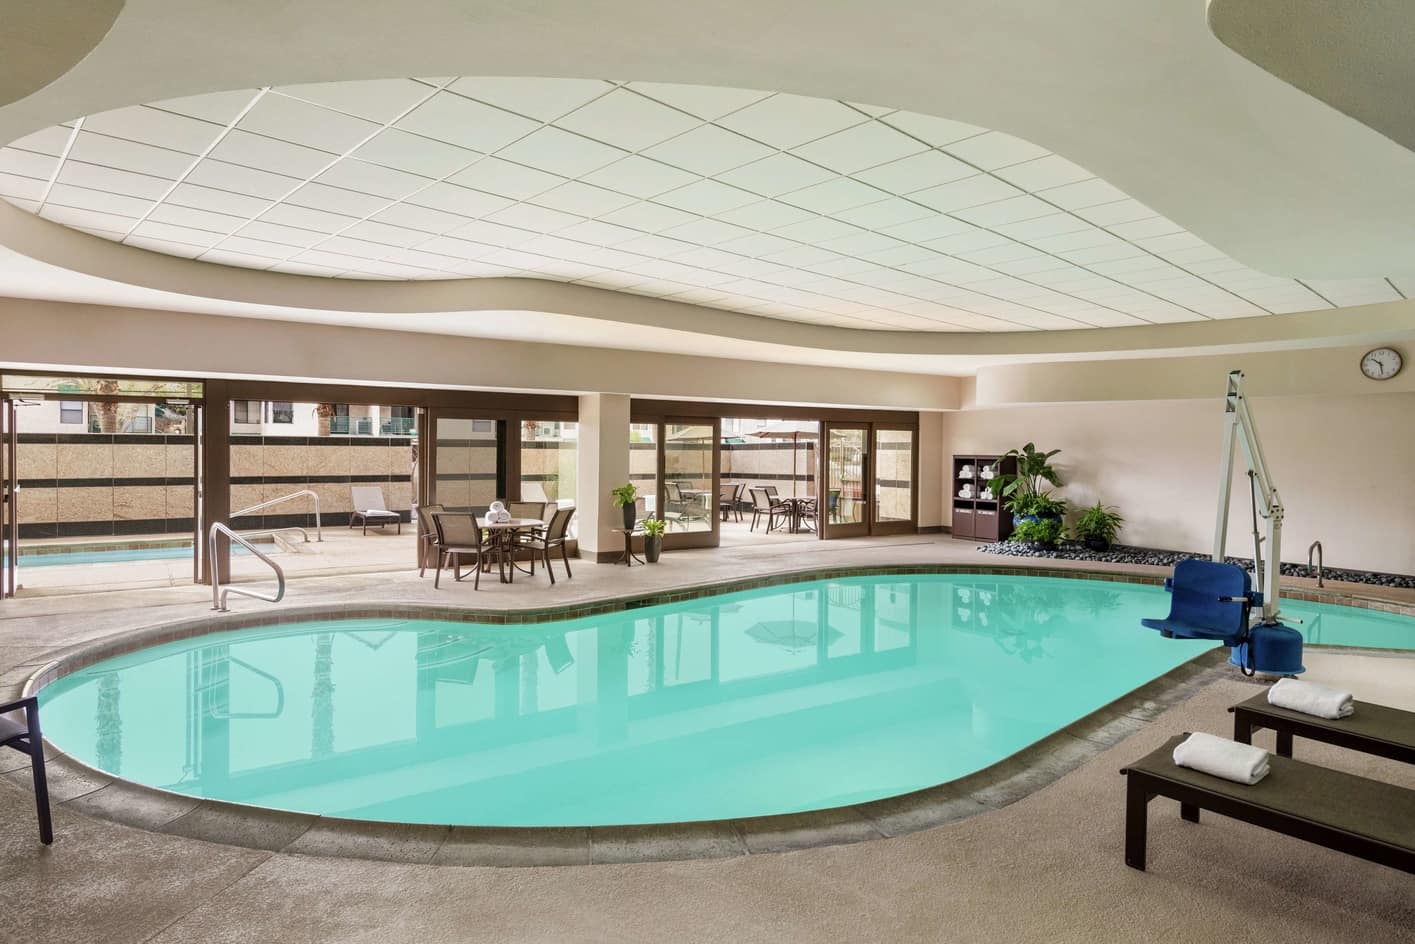 Embassy Suites Convention Center, best hotels in Las Vegas with indoor pool